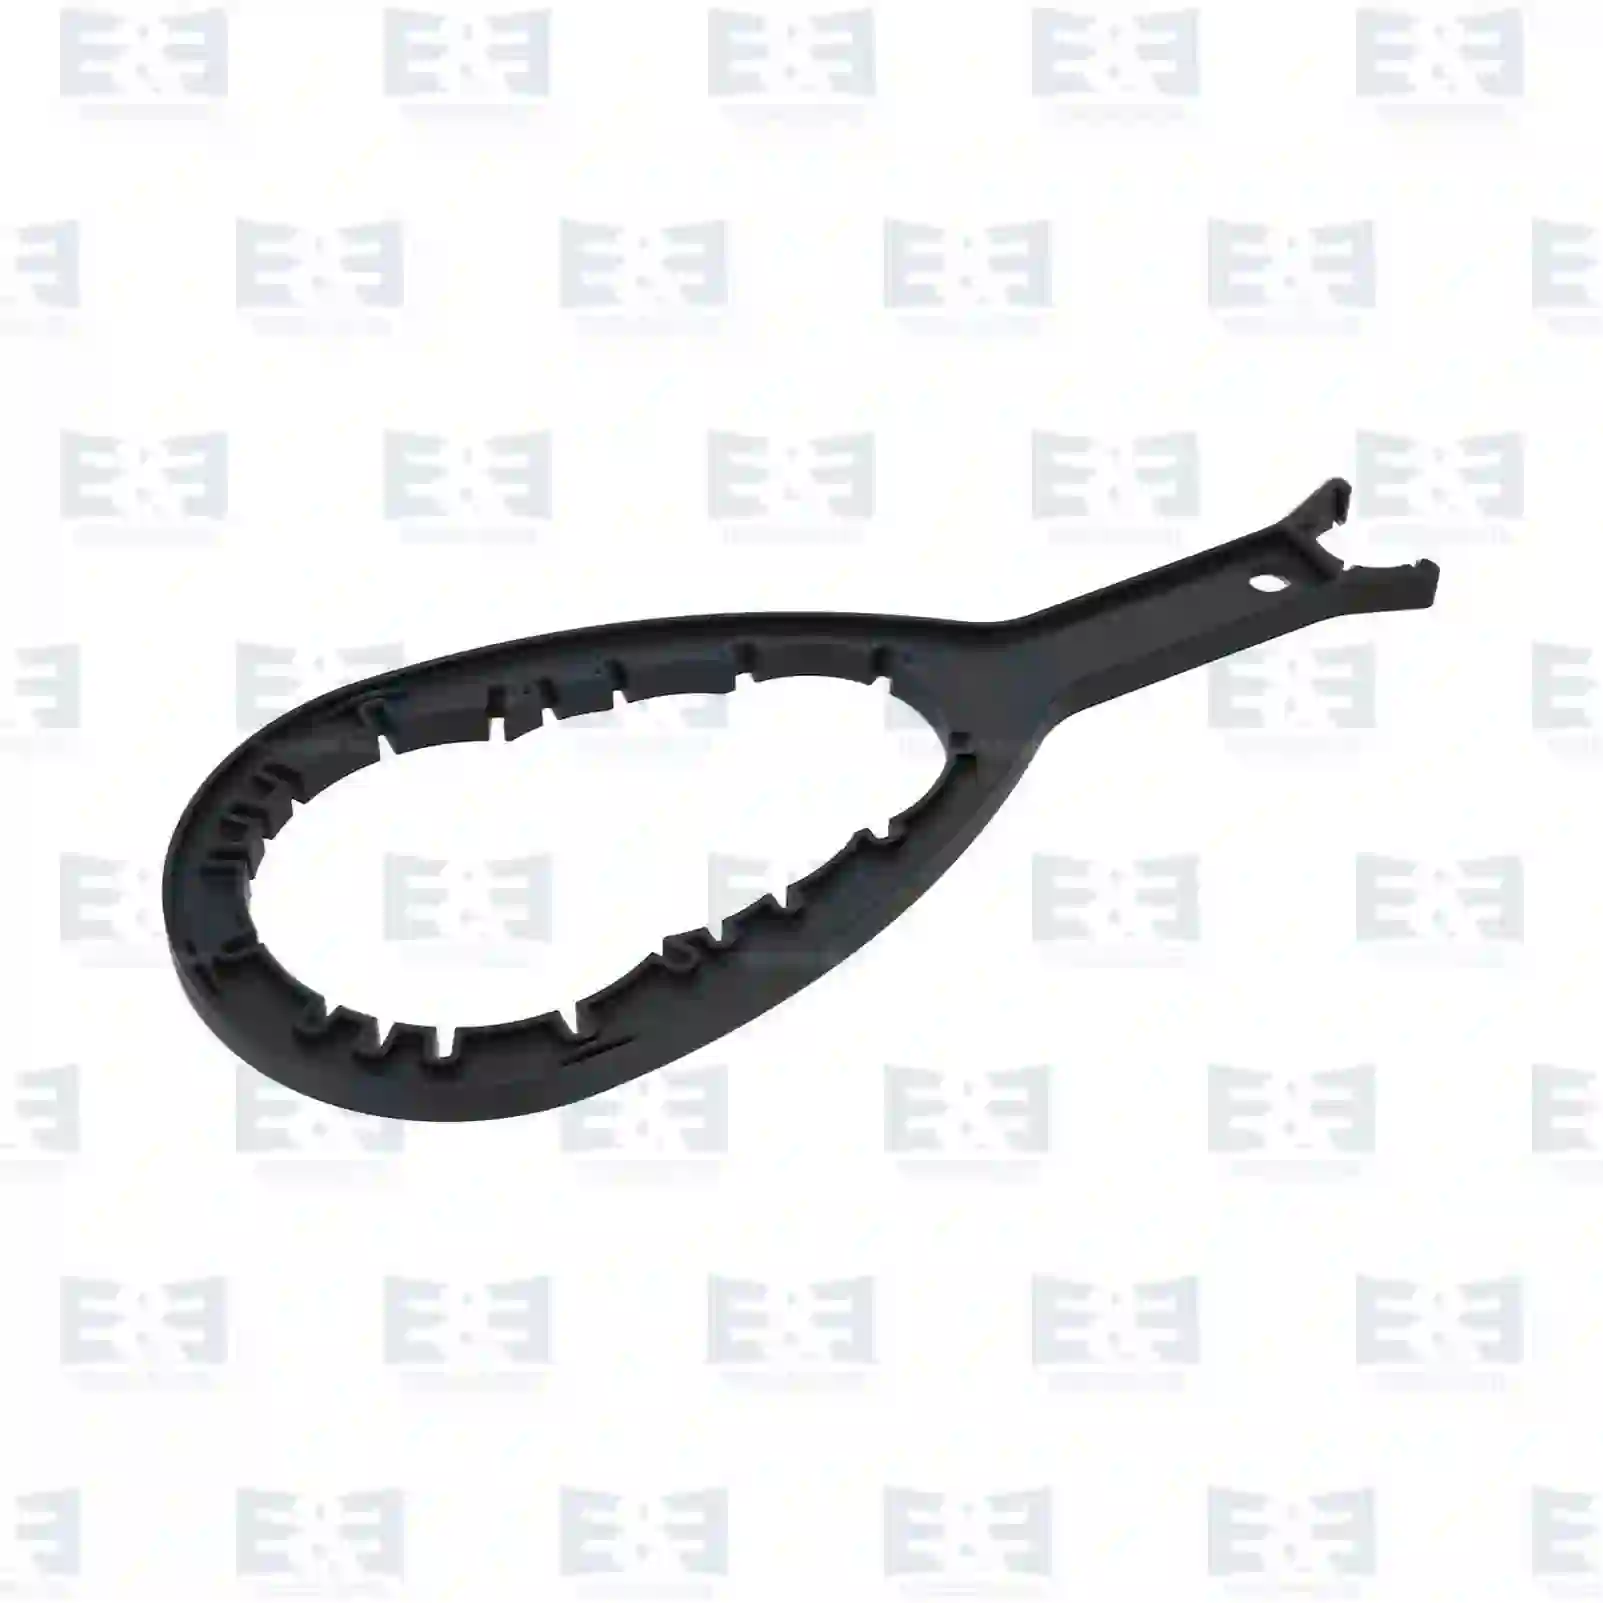  Key, collecting pan || E&E Truck Spare Parts | Truck Spare Parts, Auotomotive Spare Parts